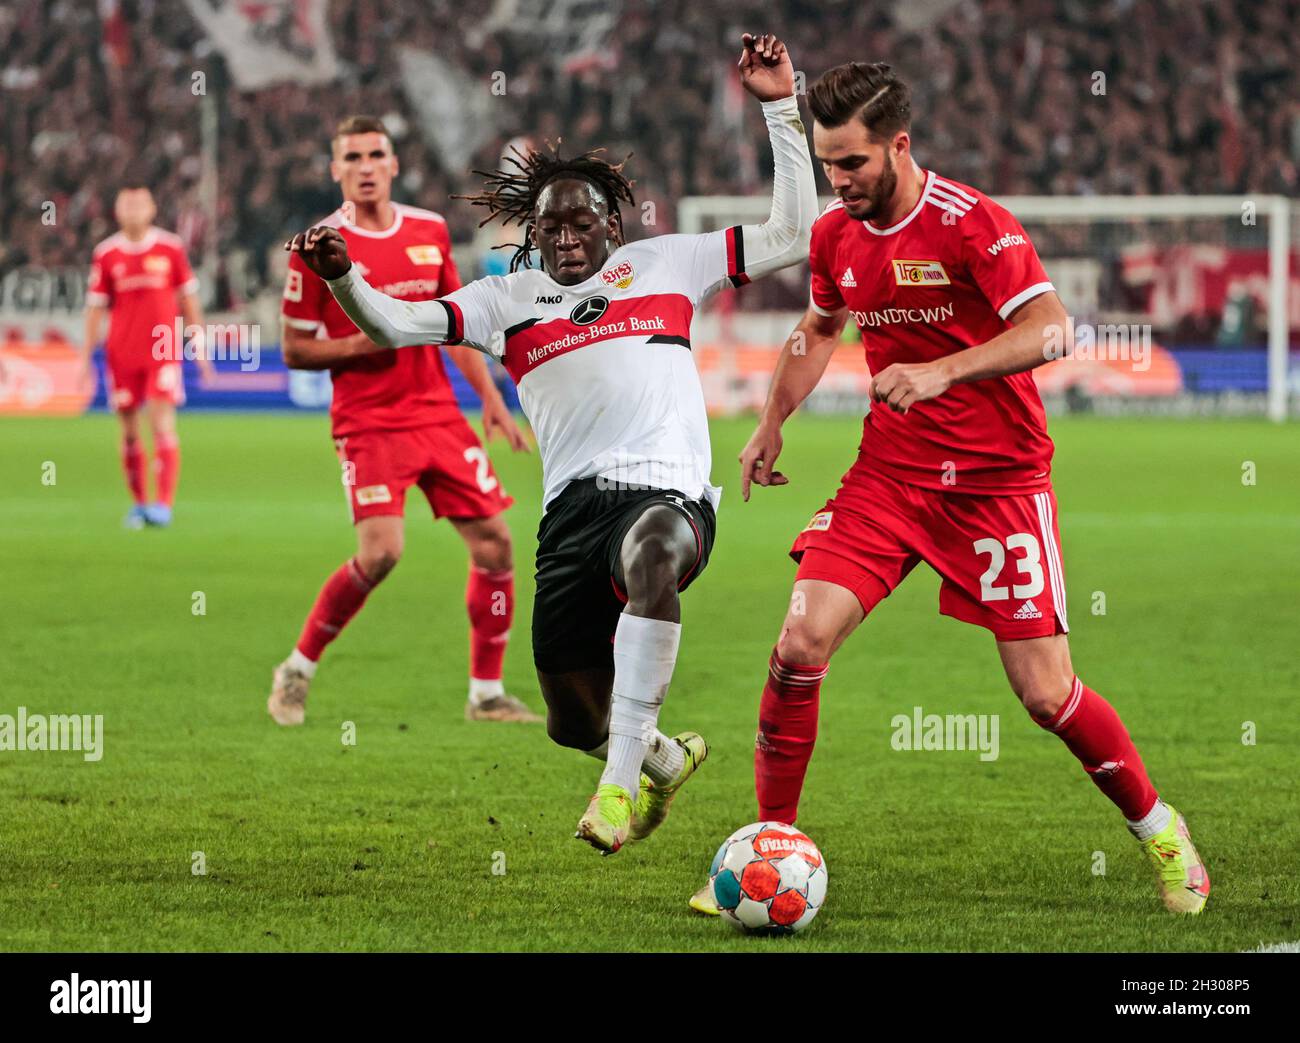 Stuttgart, Germany. 24th Oct, 2021. Tanguy Coulibaly (2nd R) of Stuttgart vies with Niko Giesselmann (1st R) of Union Berlin during a German Bundesliga match between VfB Stuttgart and 1.FC Union Berlin in Stuttgart, Germany, on Oct. 24, 2021. Credit: Philippe Ruiz/Xinhua/Alamy Live News Stock Photo